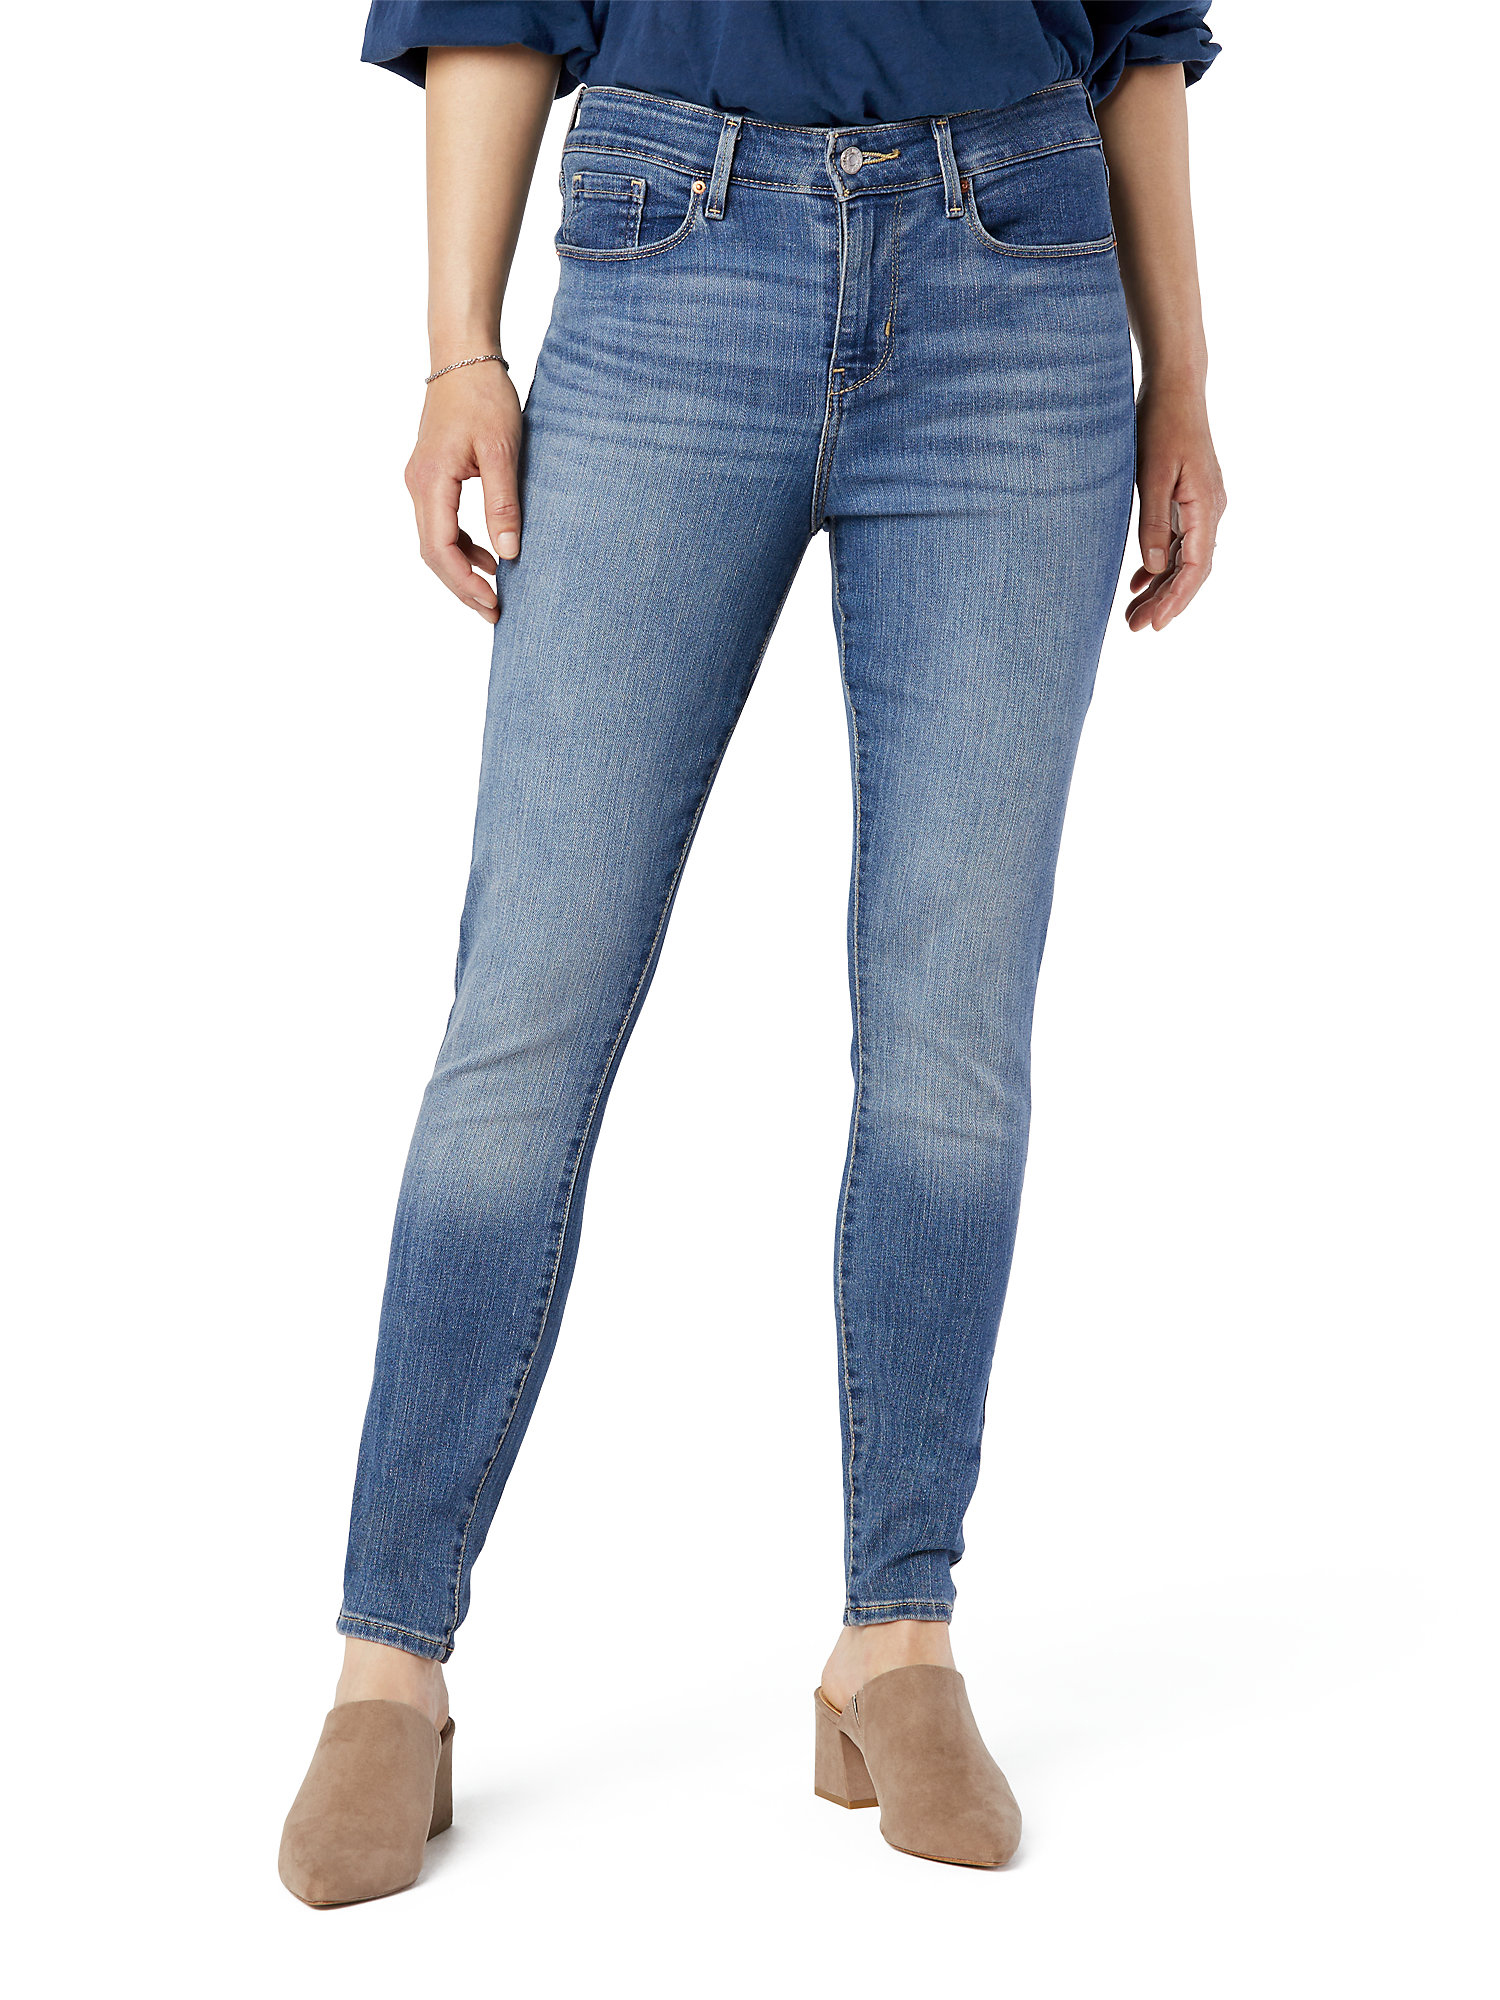 Signature by Levi Strauss & Co. Women's and Women's Plus Mid Rise Skinny Jeans - image 1 of 5